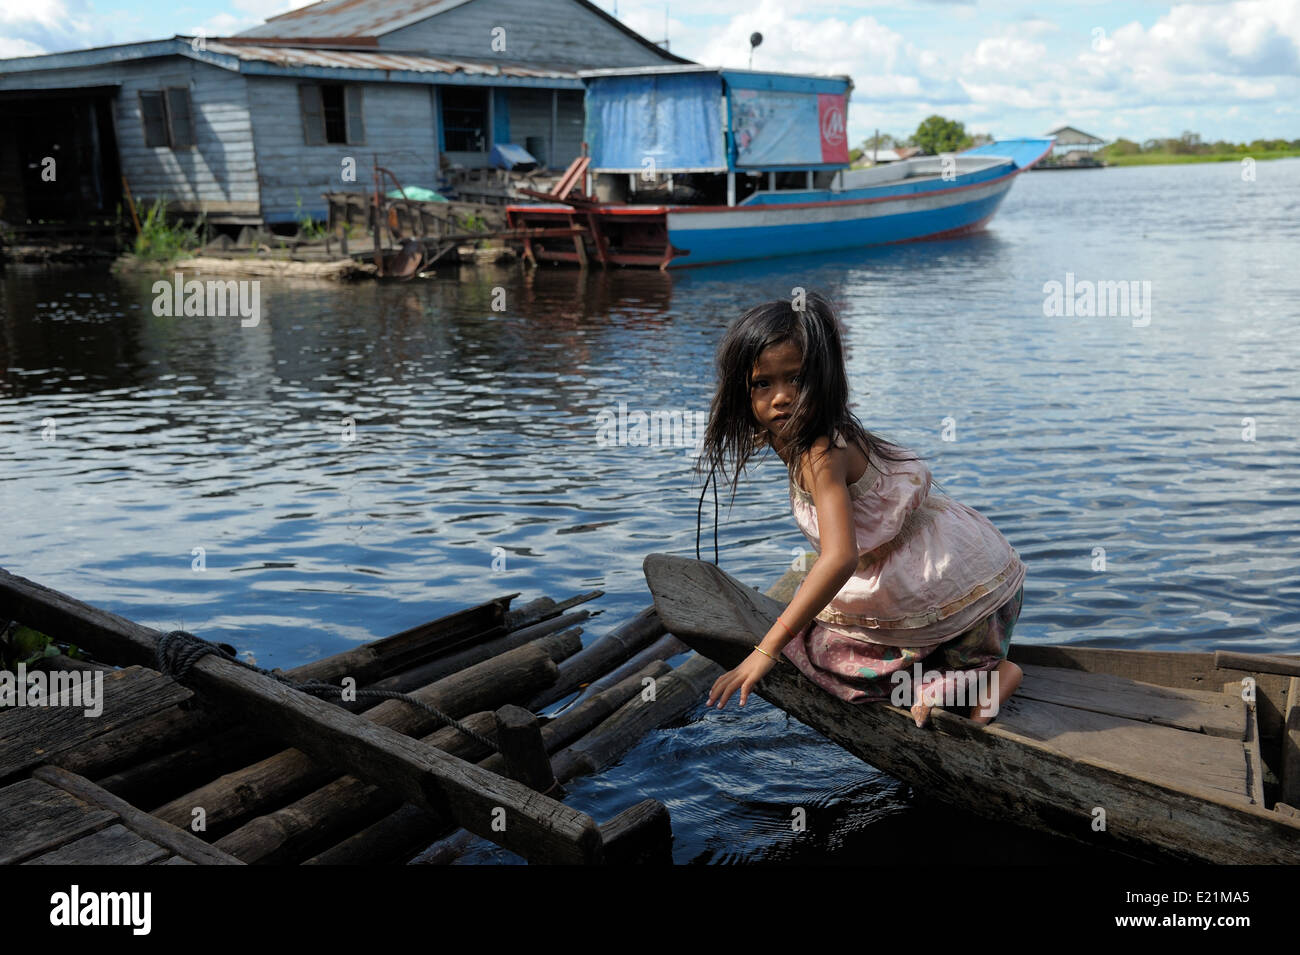 Girl on a boat reaching her floating house, Tonle Sap Lake, Cambodia Stock Photo